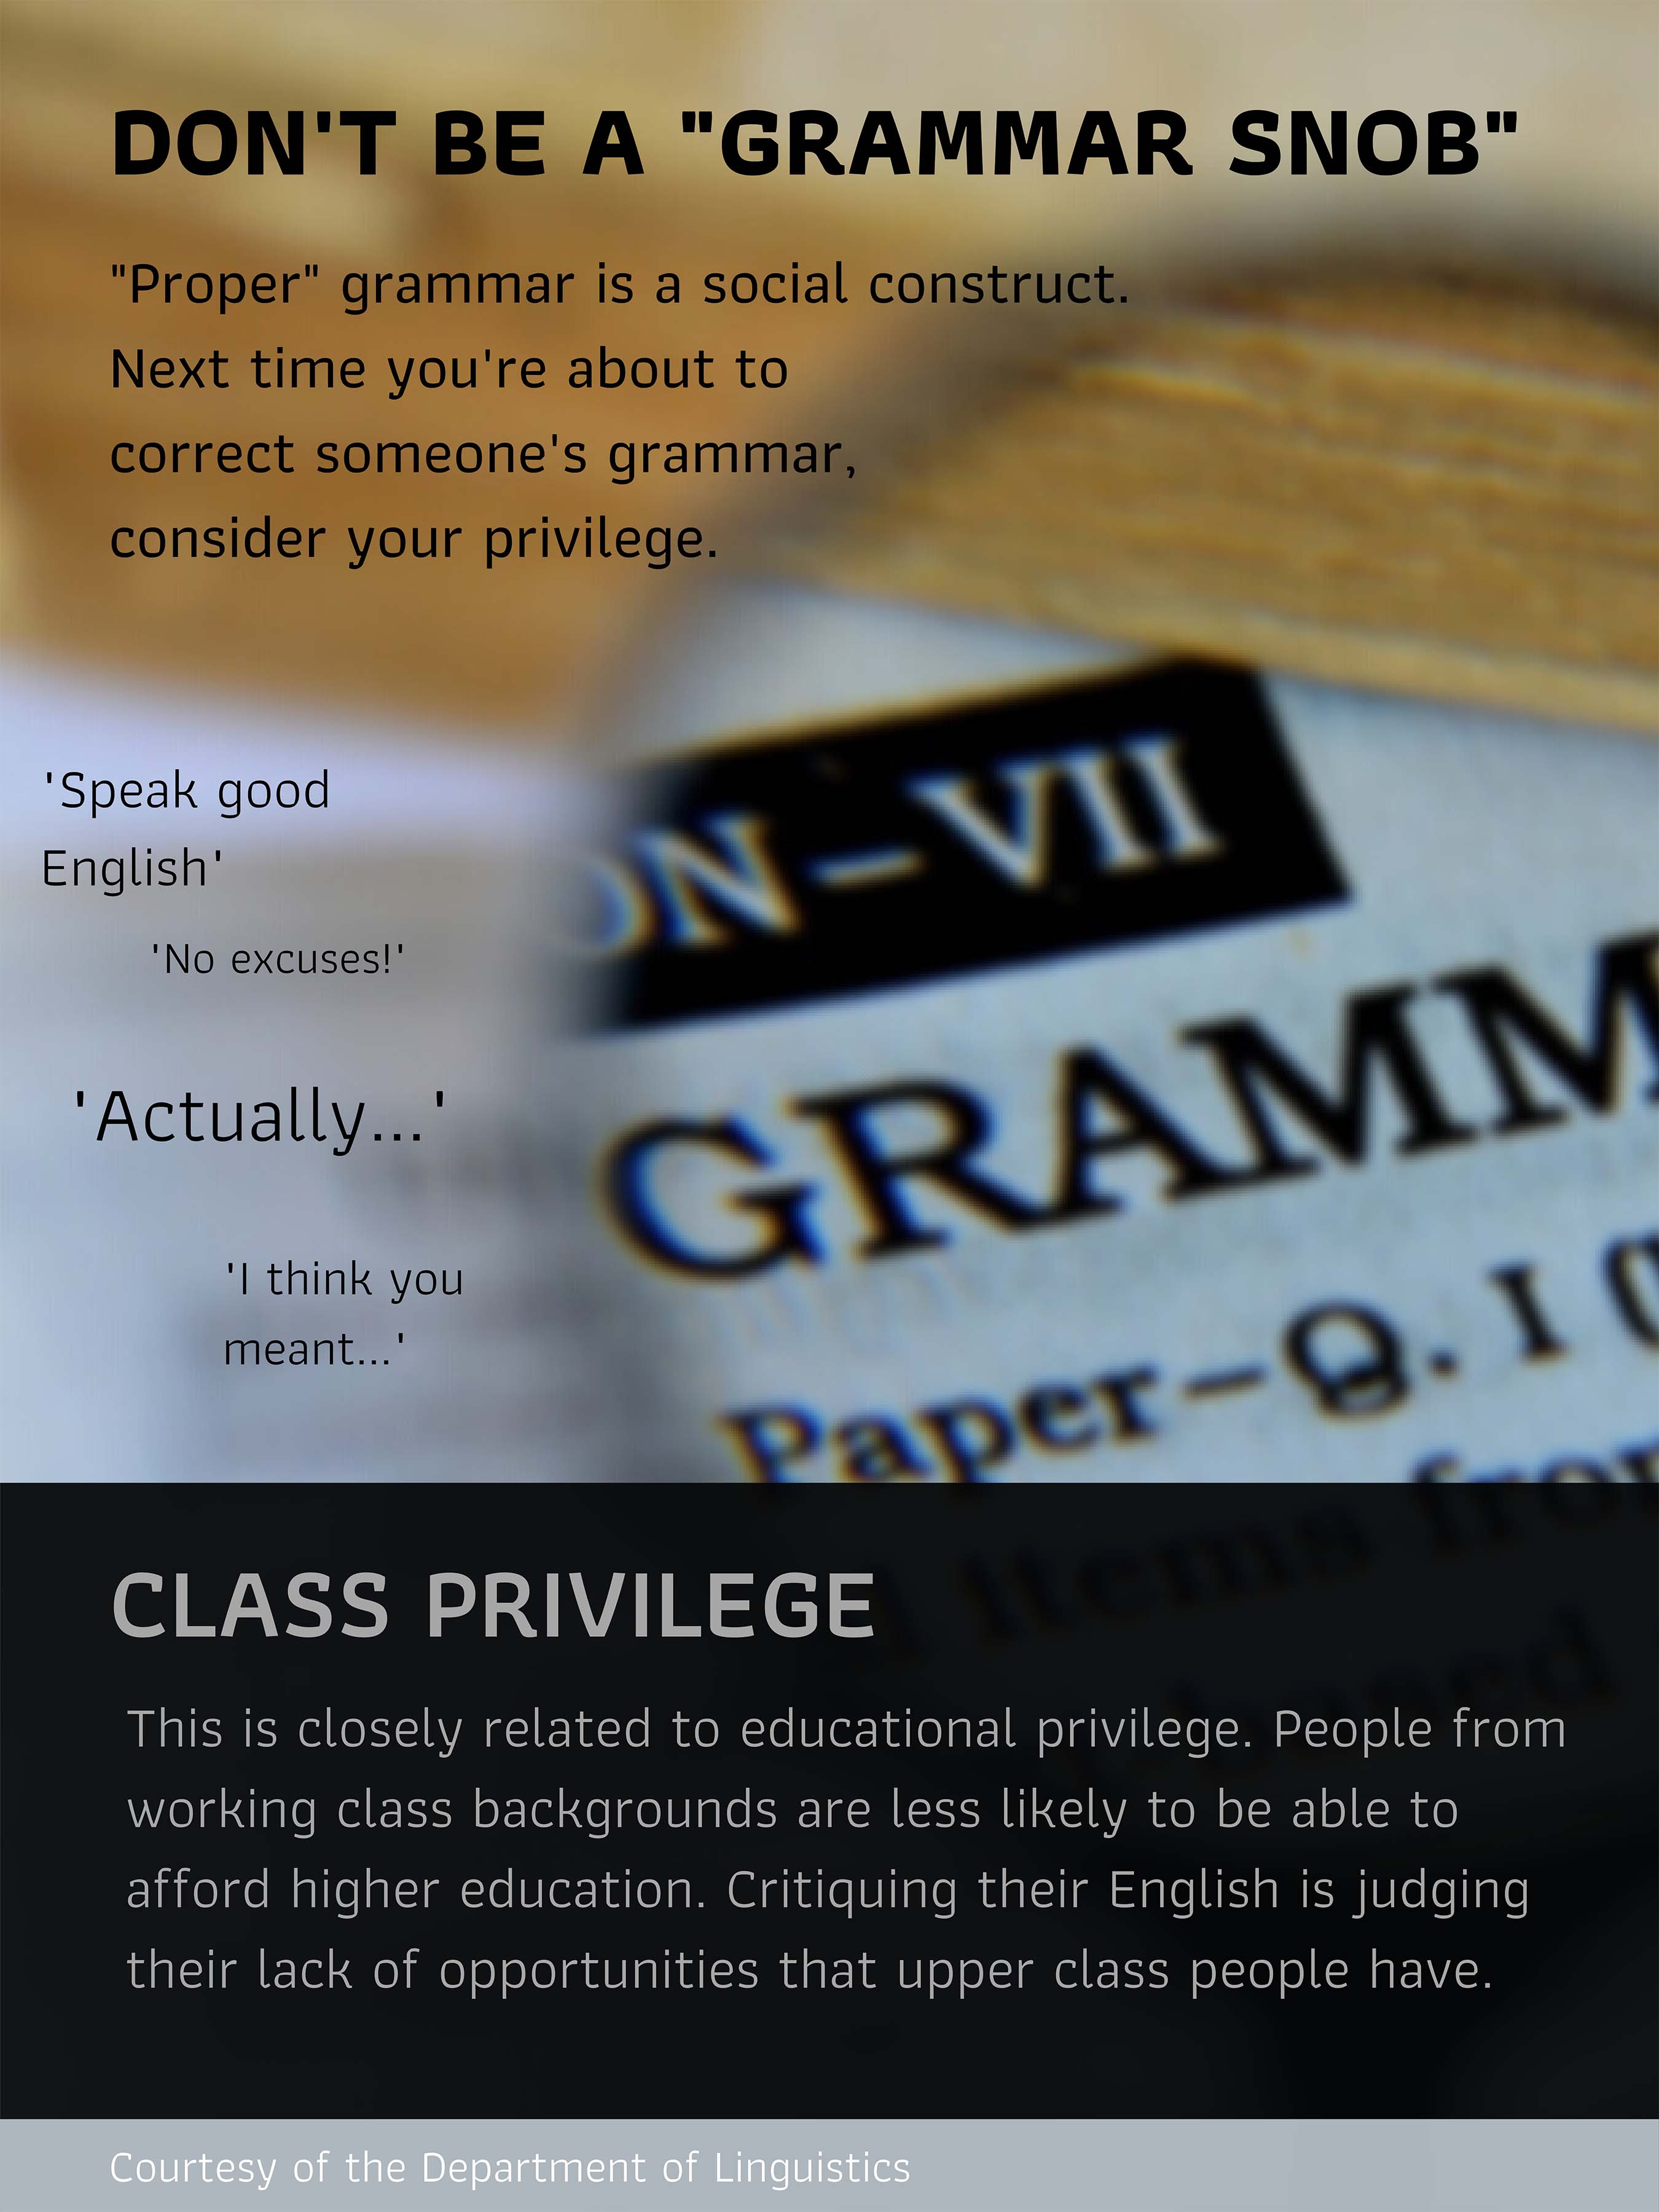 Don't be a grammar snob. Consider your class privilege. Click on image to see full description.